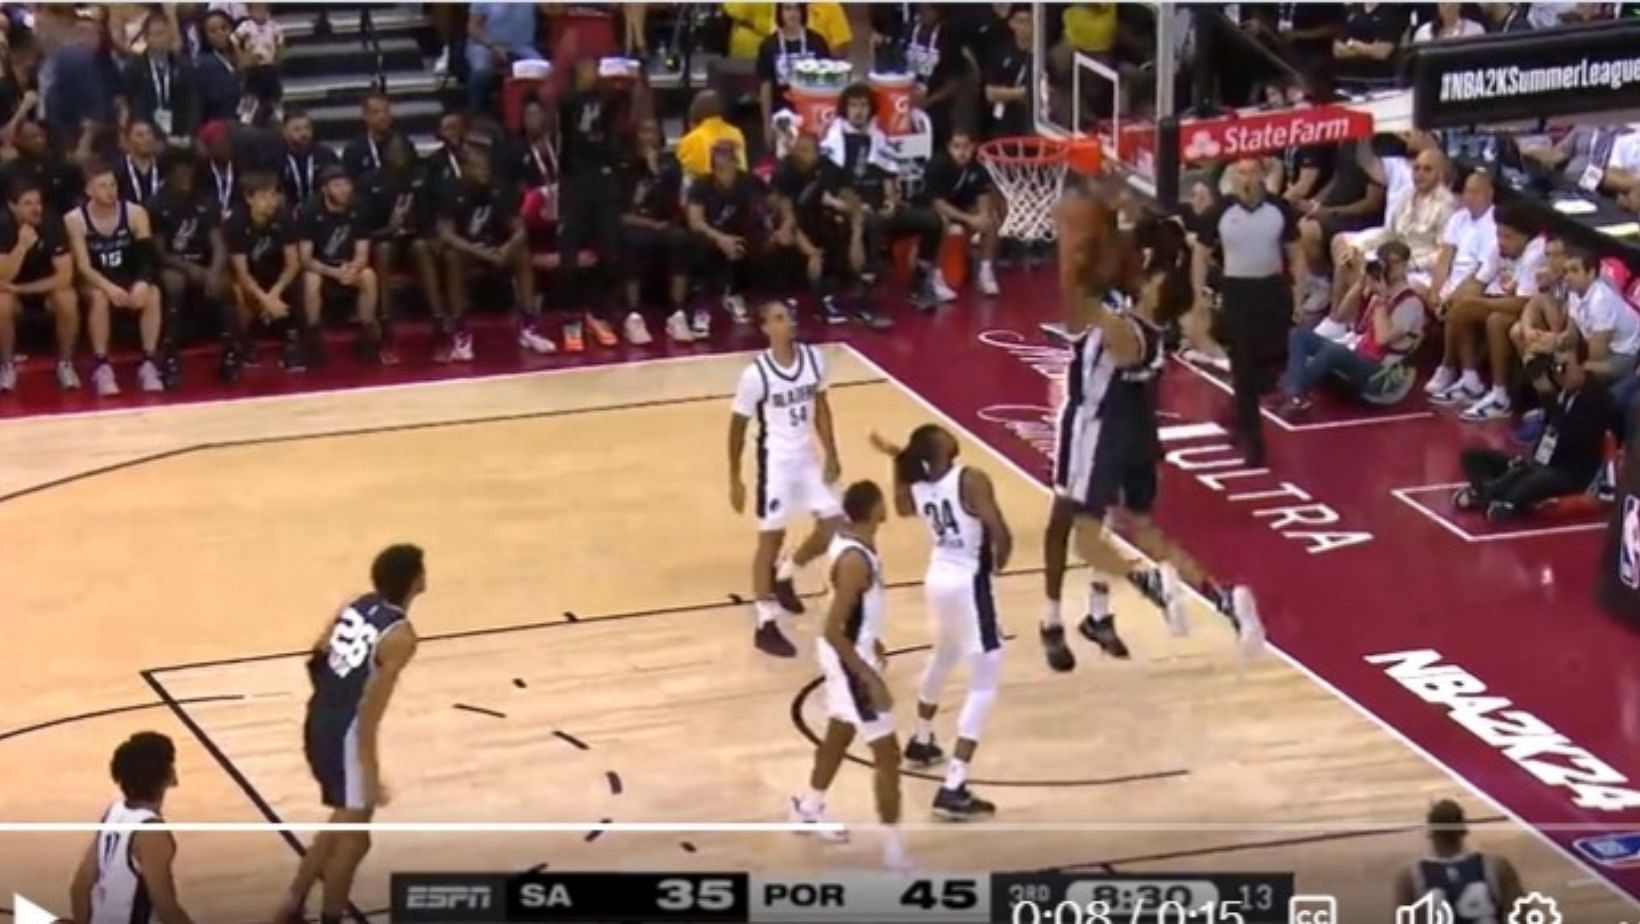 Victor Wembanyama had another highlight reel sequence in the third quarter of the San Antonio Spurs versus Portland Trail Blazers game.